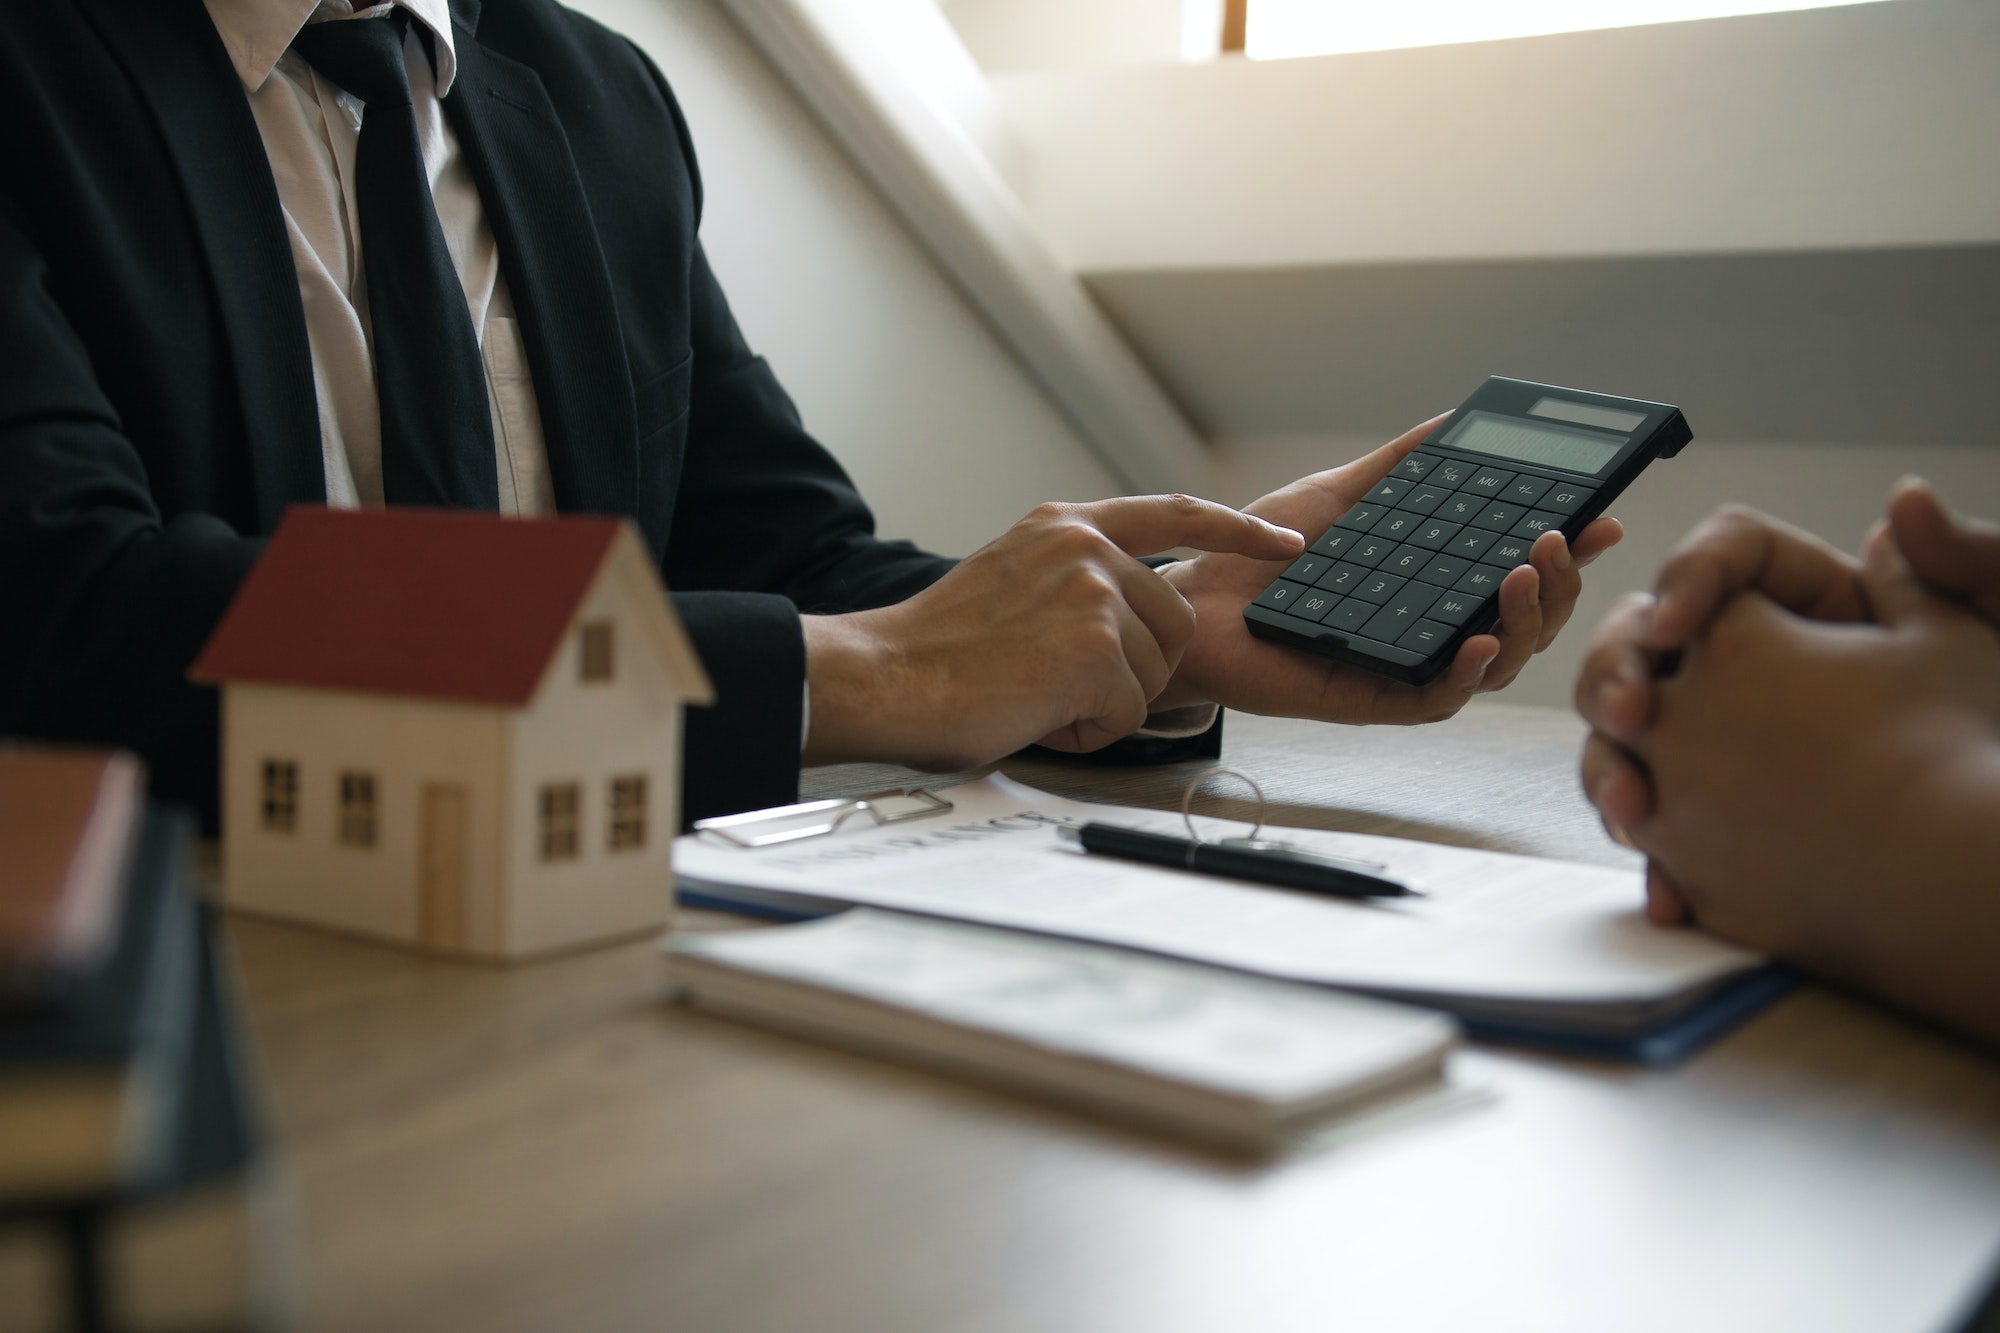 Agents are calculating the loan payment rate or the amount of insurance